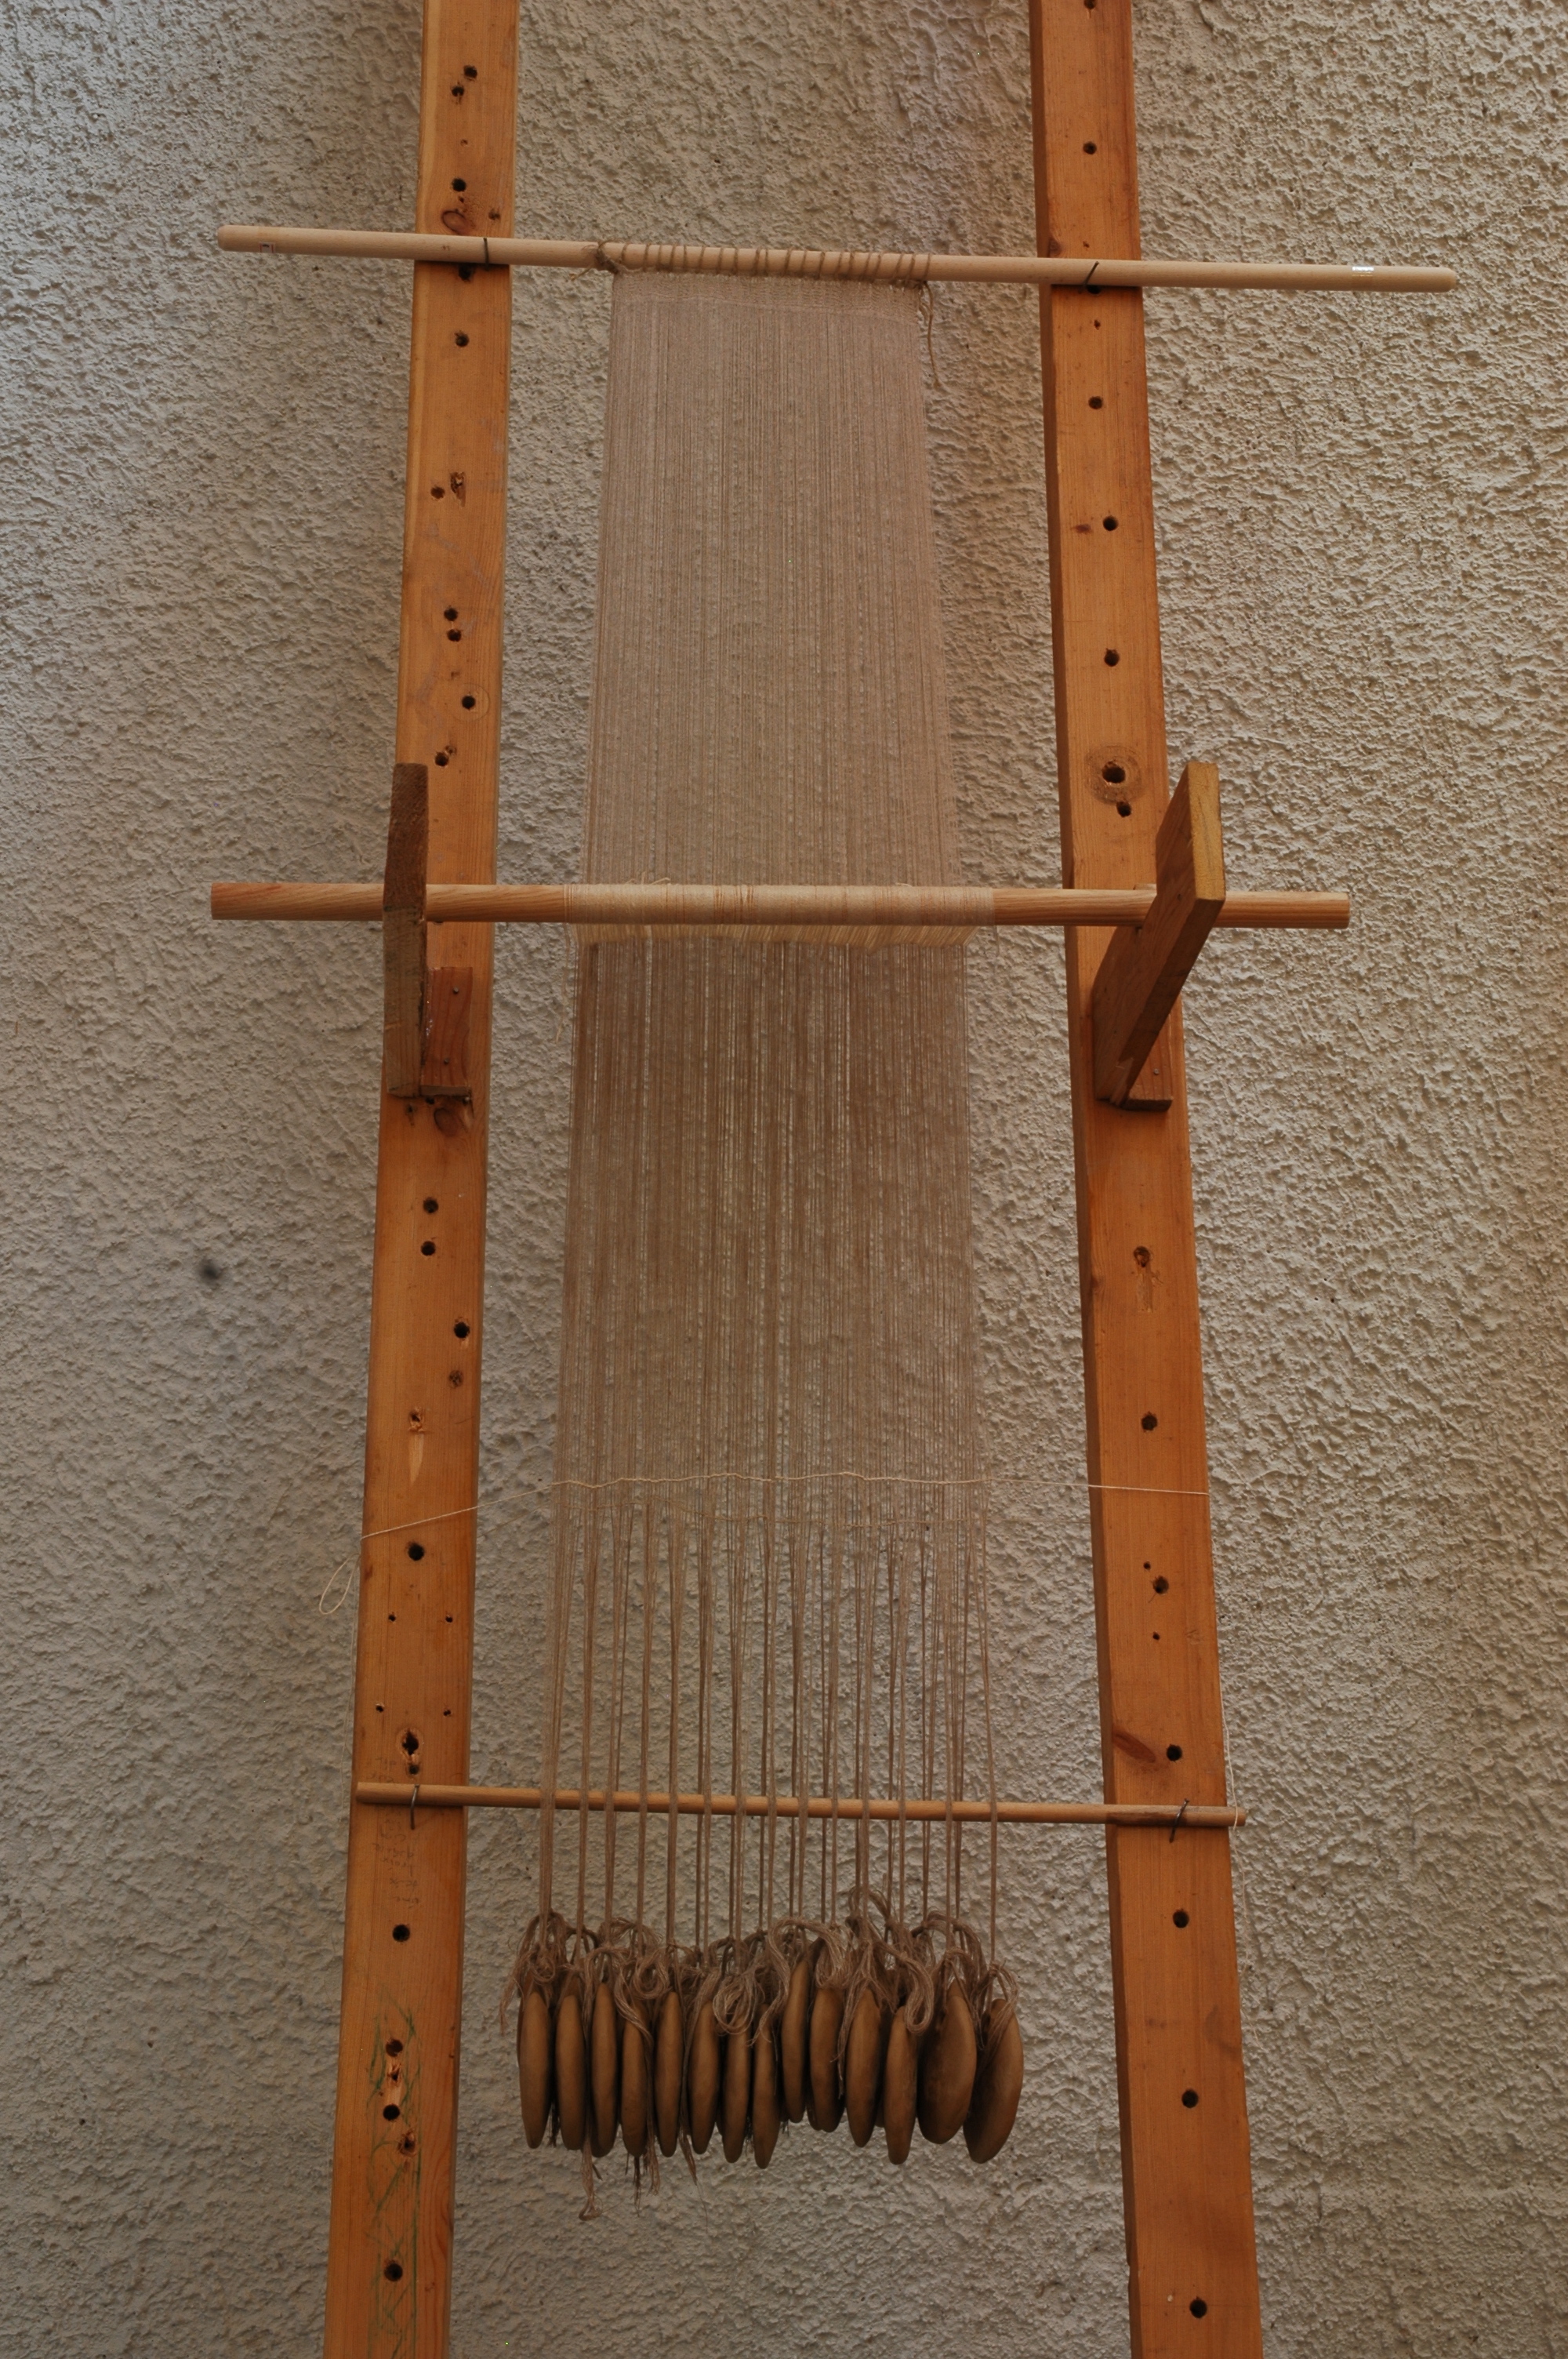 reconstruction, warp-weighted loom, experimental archaeology, Akrotiri  |www.artextiles.org